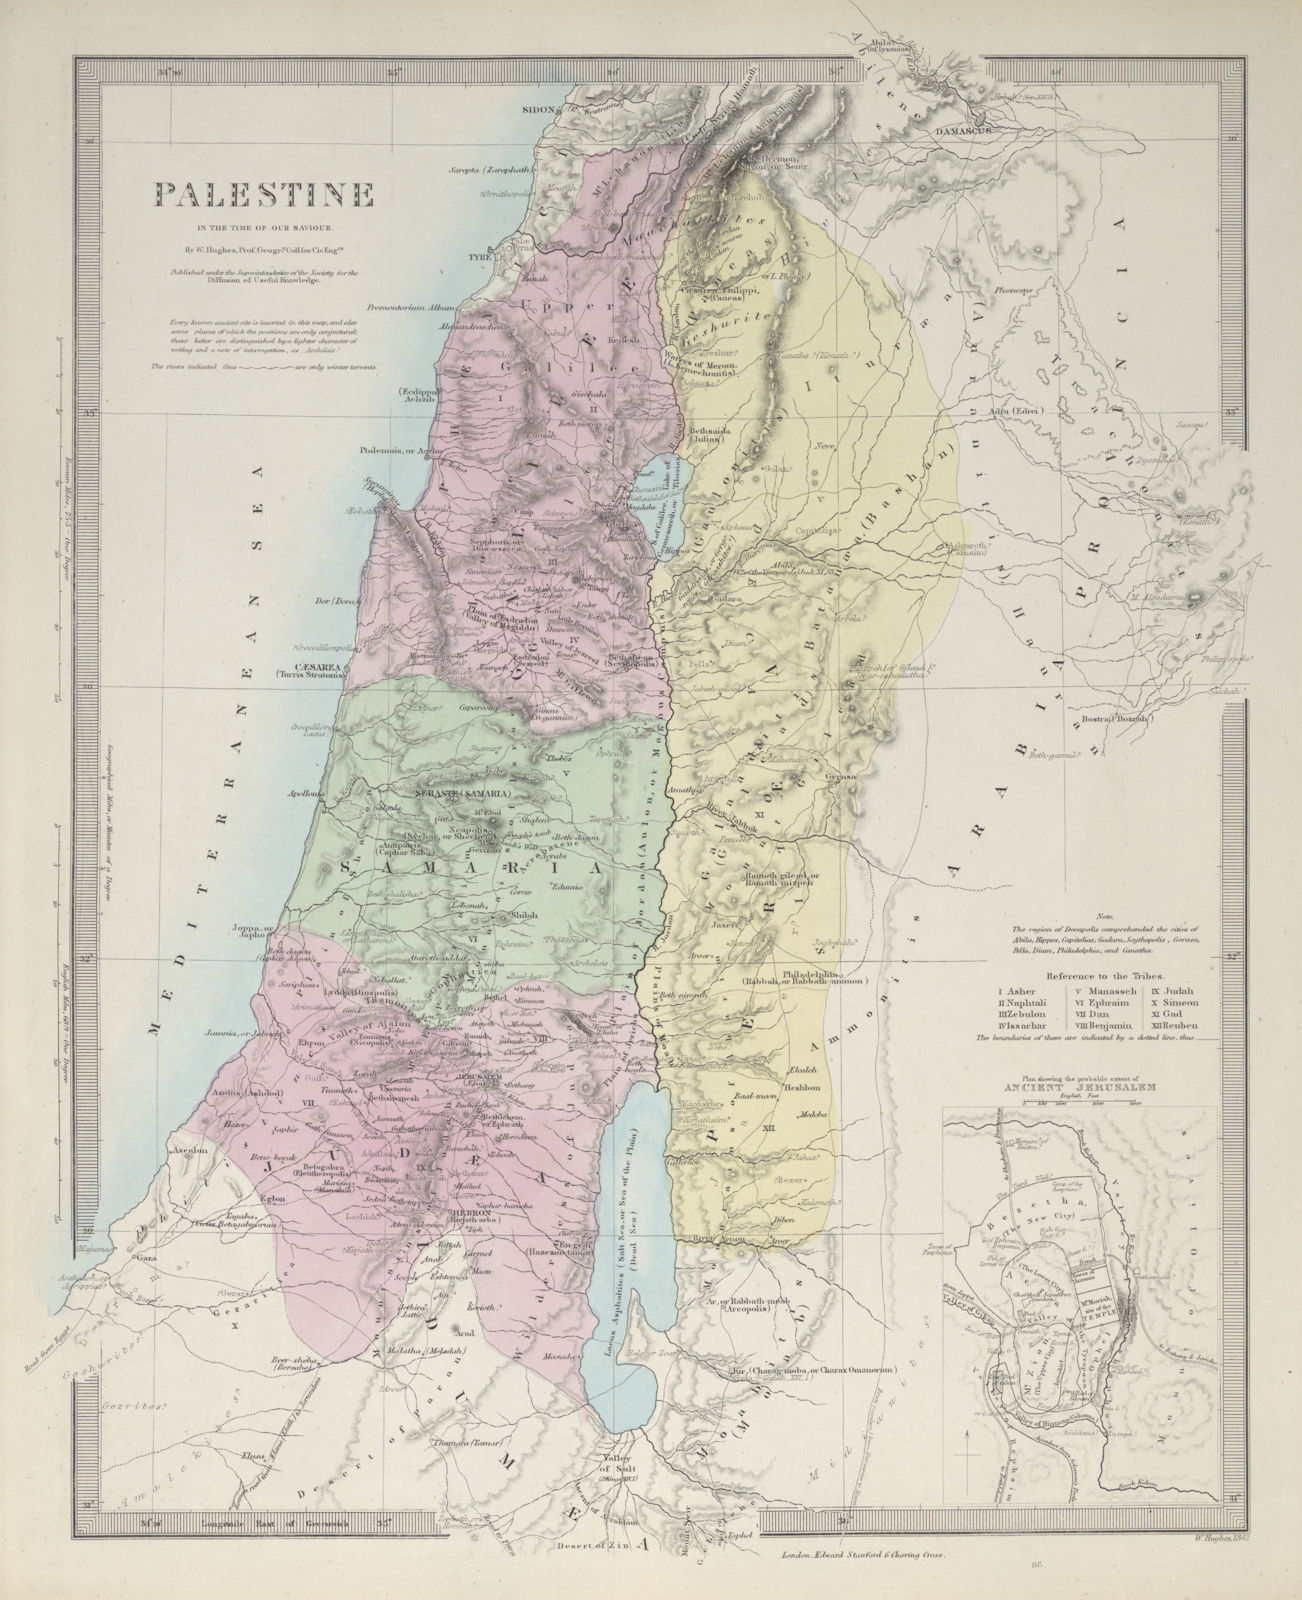 PALESTINE in the time of Our Saviour. Ancient Jerusalem. Israel. SDUK 1857 map